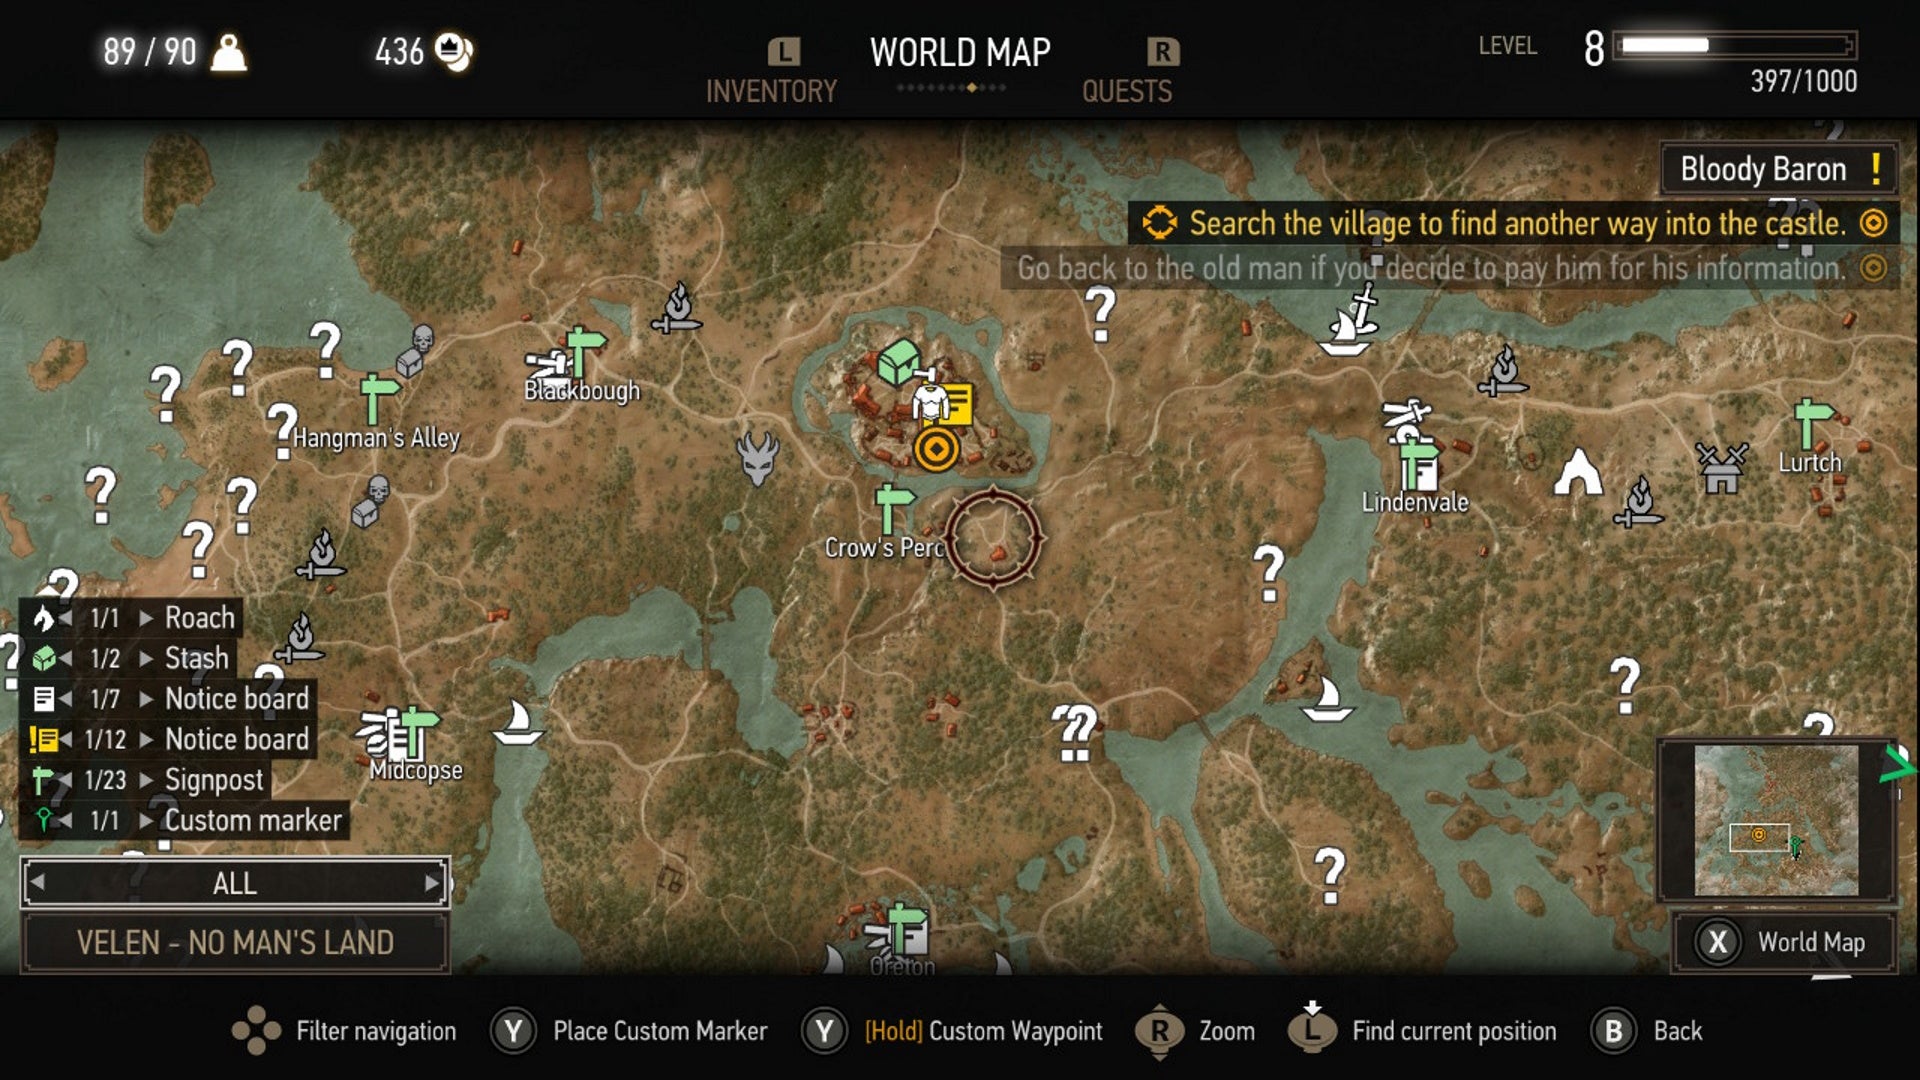 The Witcher 3 saddlebags: A map is shown, depicting areas around Novigrad. The Crow's Perch region is in the center